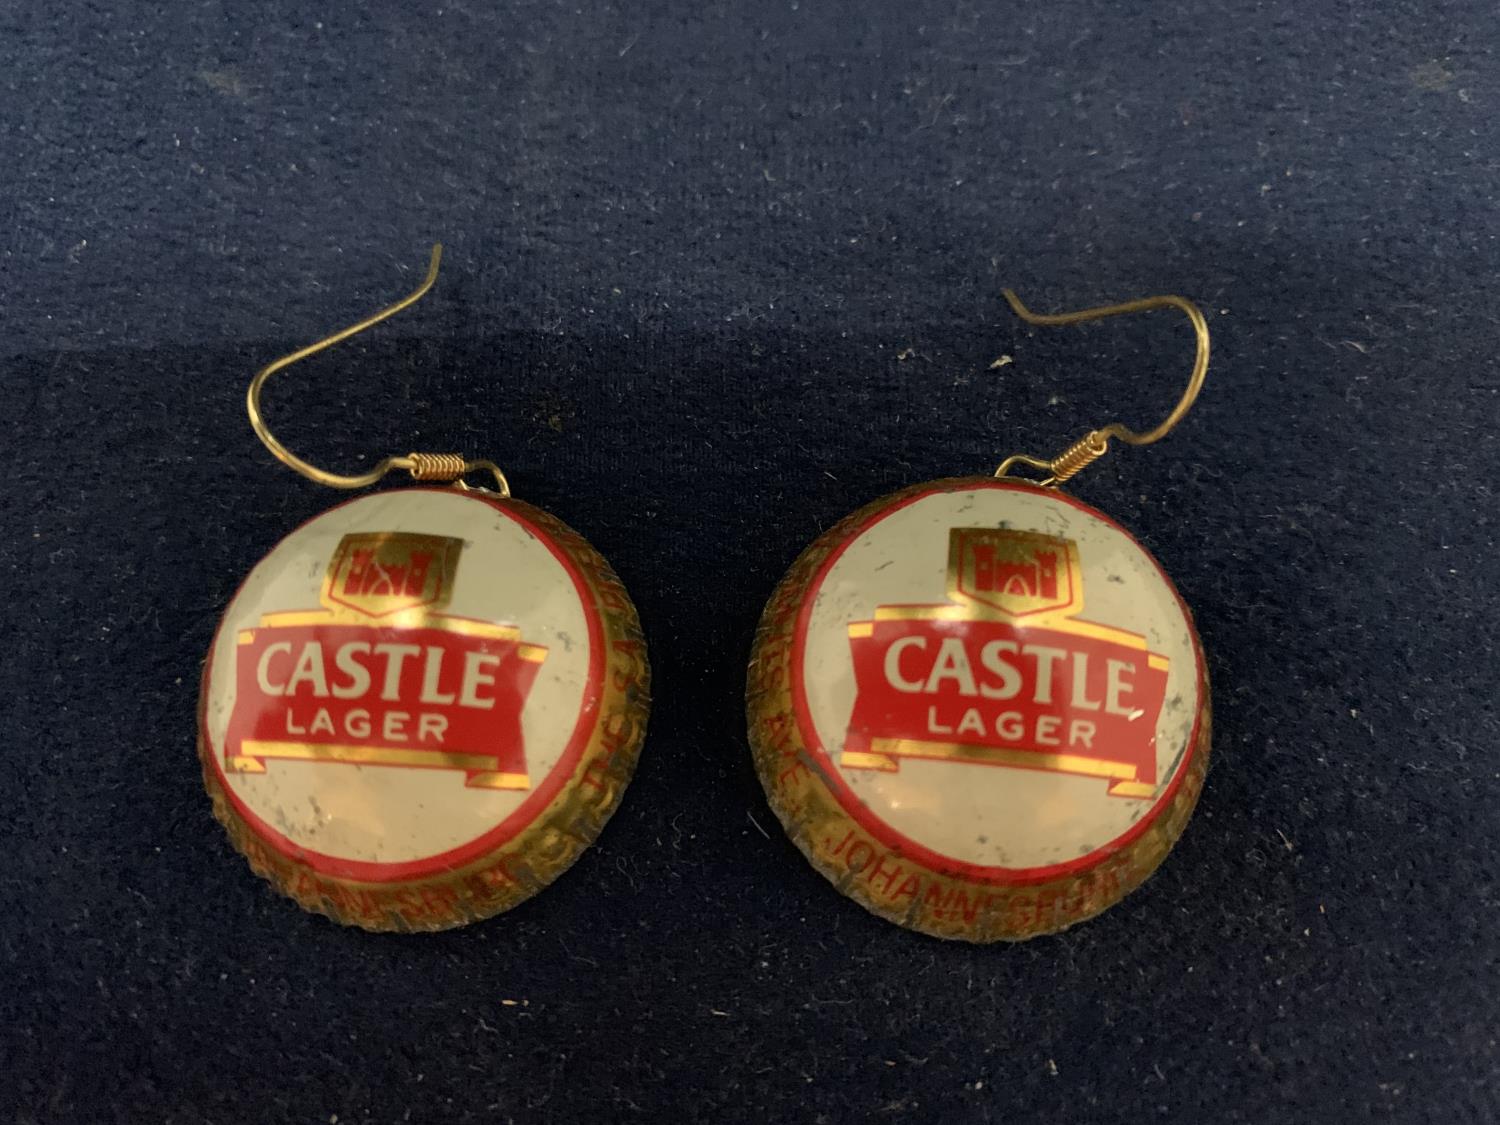 A PAIR OF CASTLE LARGER TOP EARRINGS